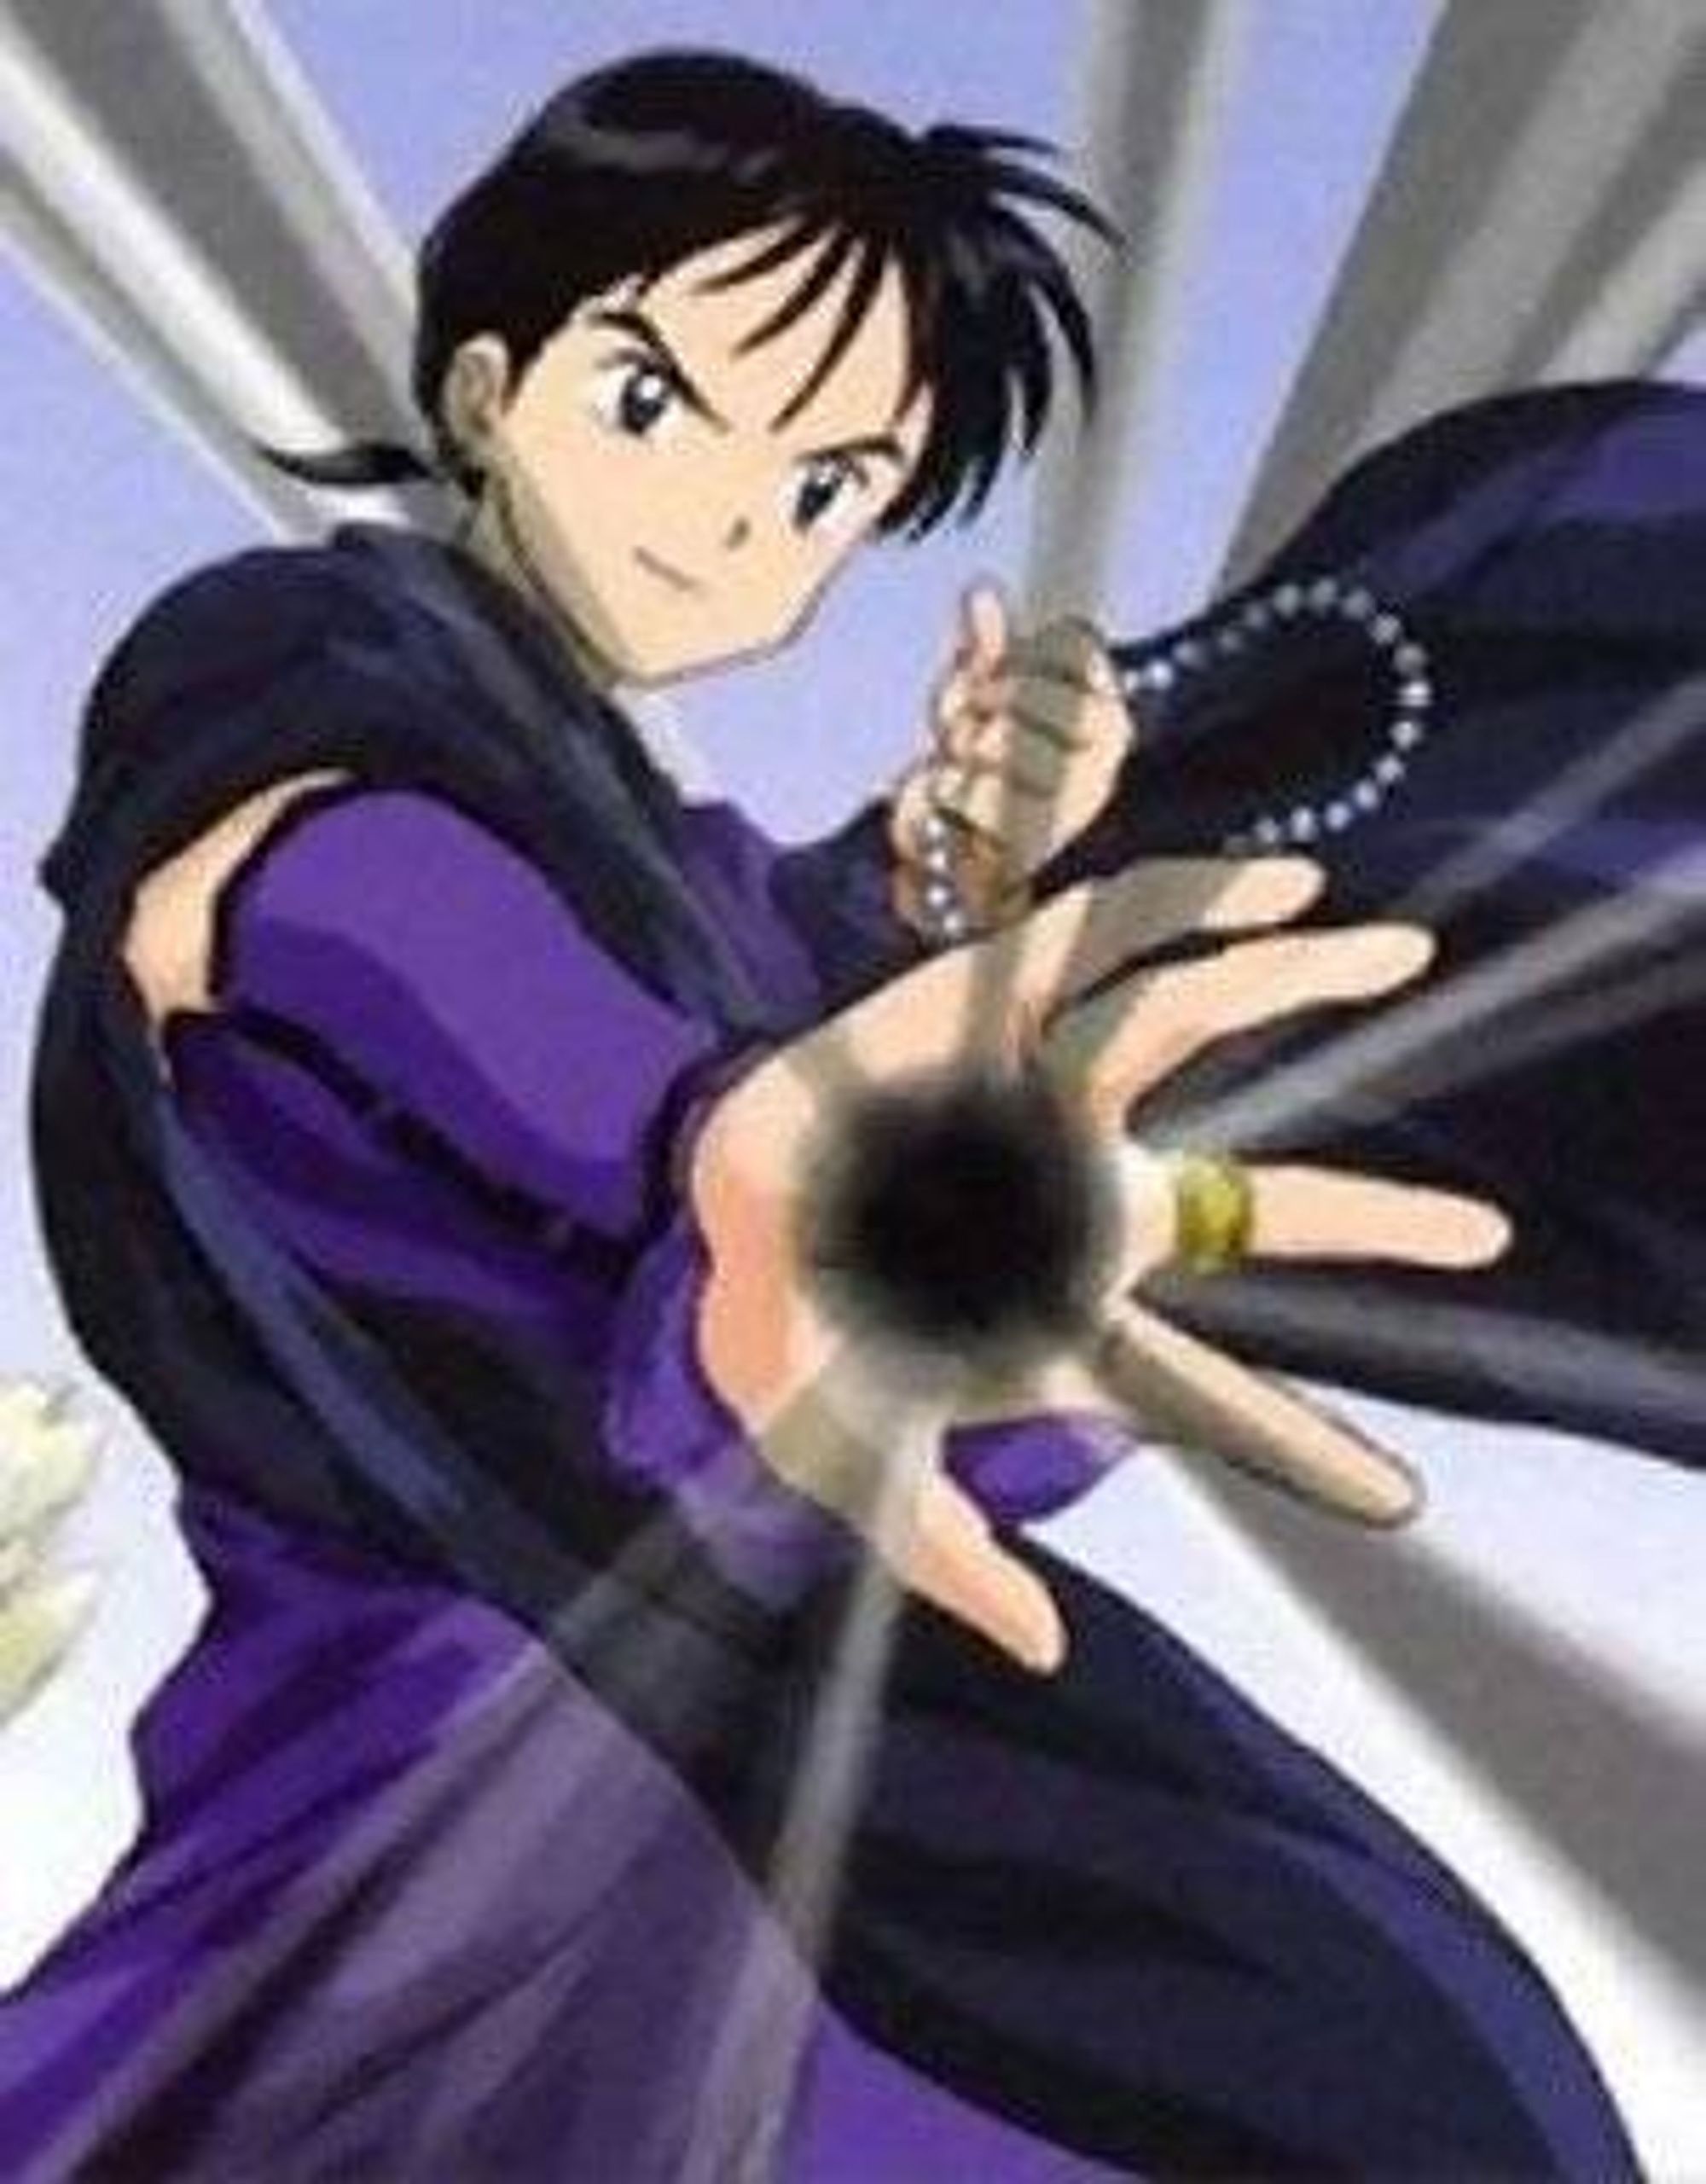 Miroku, the monk with a cursed hand, from Inuyasha by Rumiko Takahashi .